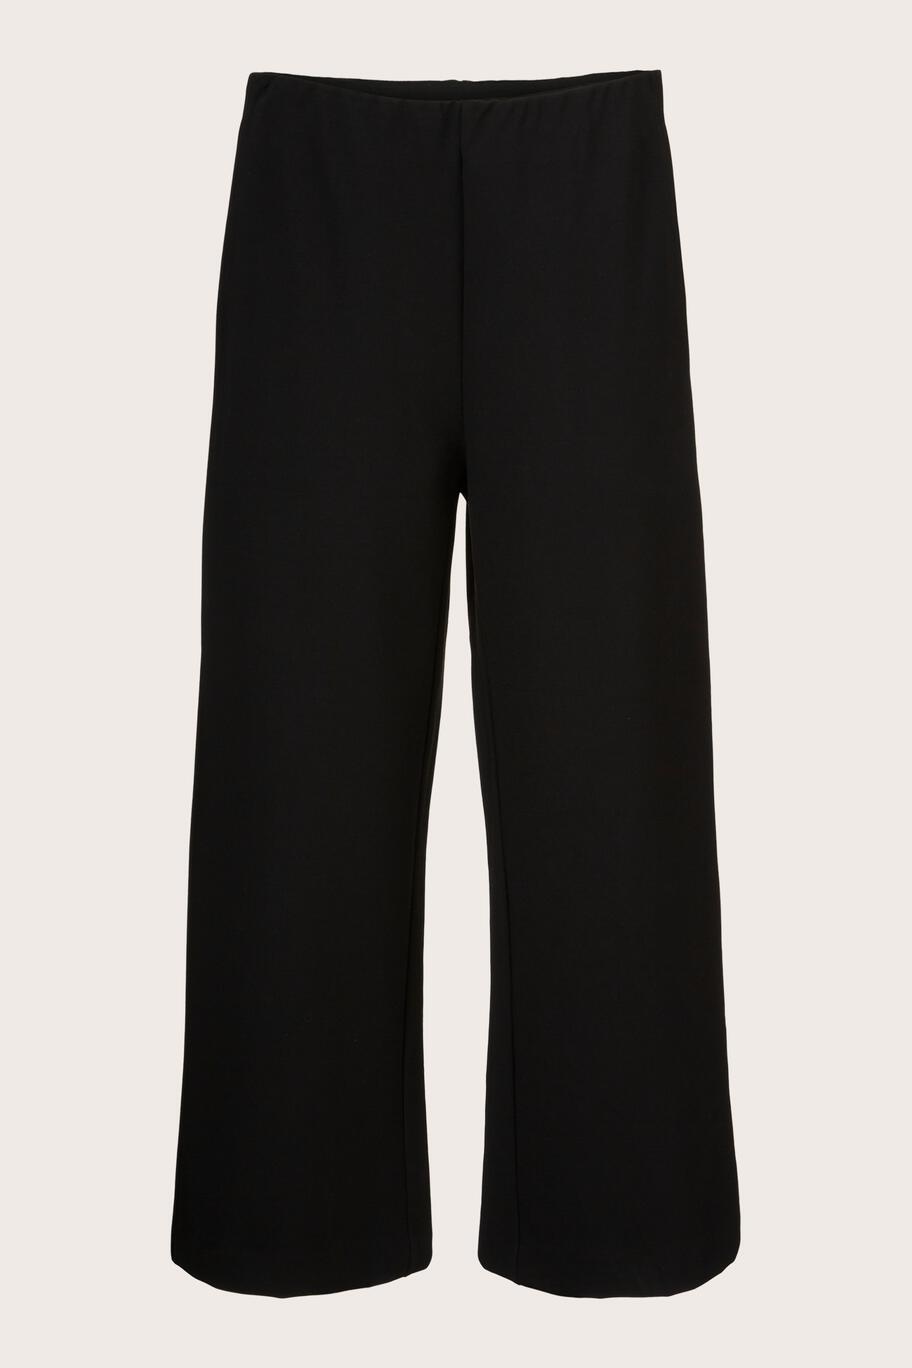 Piri Jersey Trousers - Masai | Official Web Shop | Fast Delivery ...